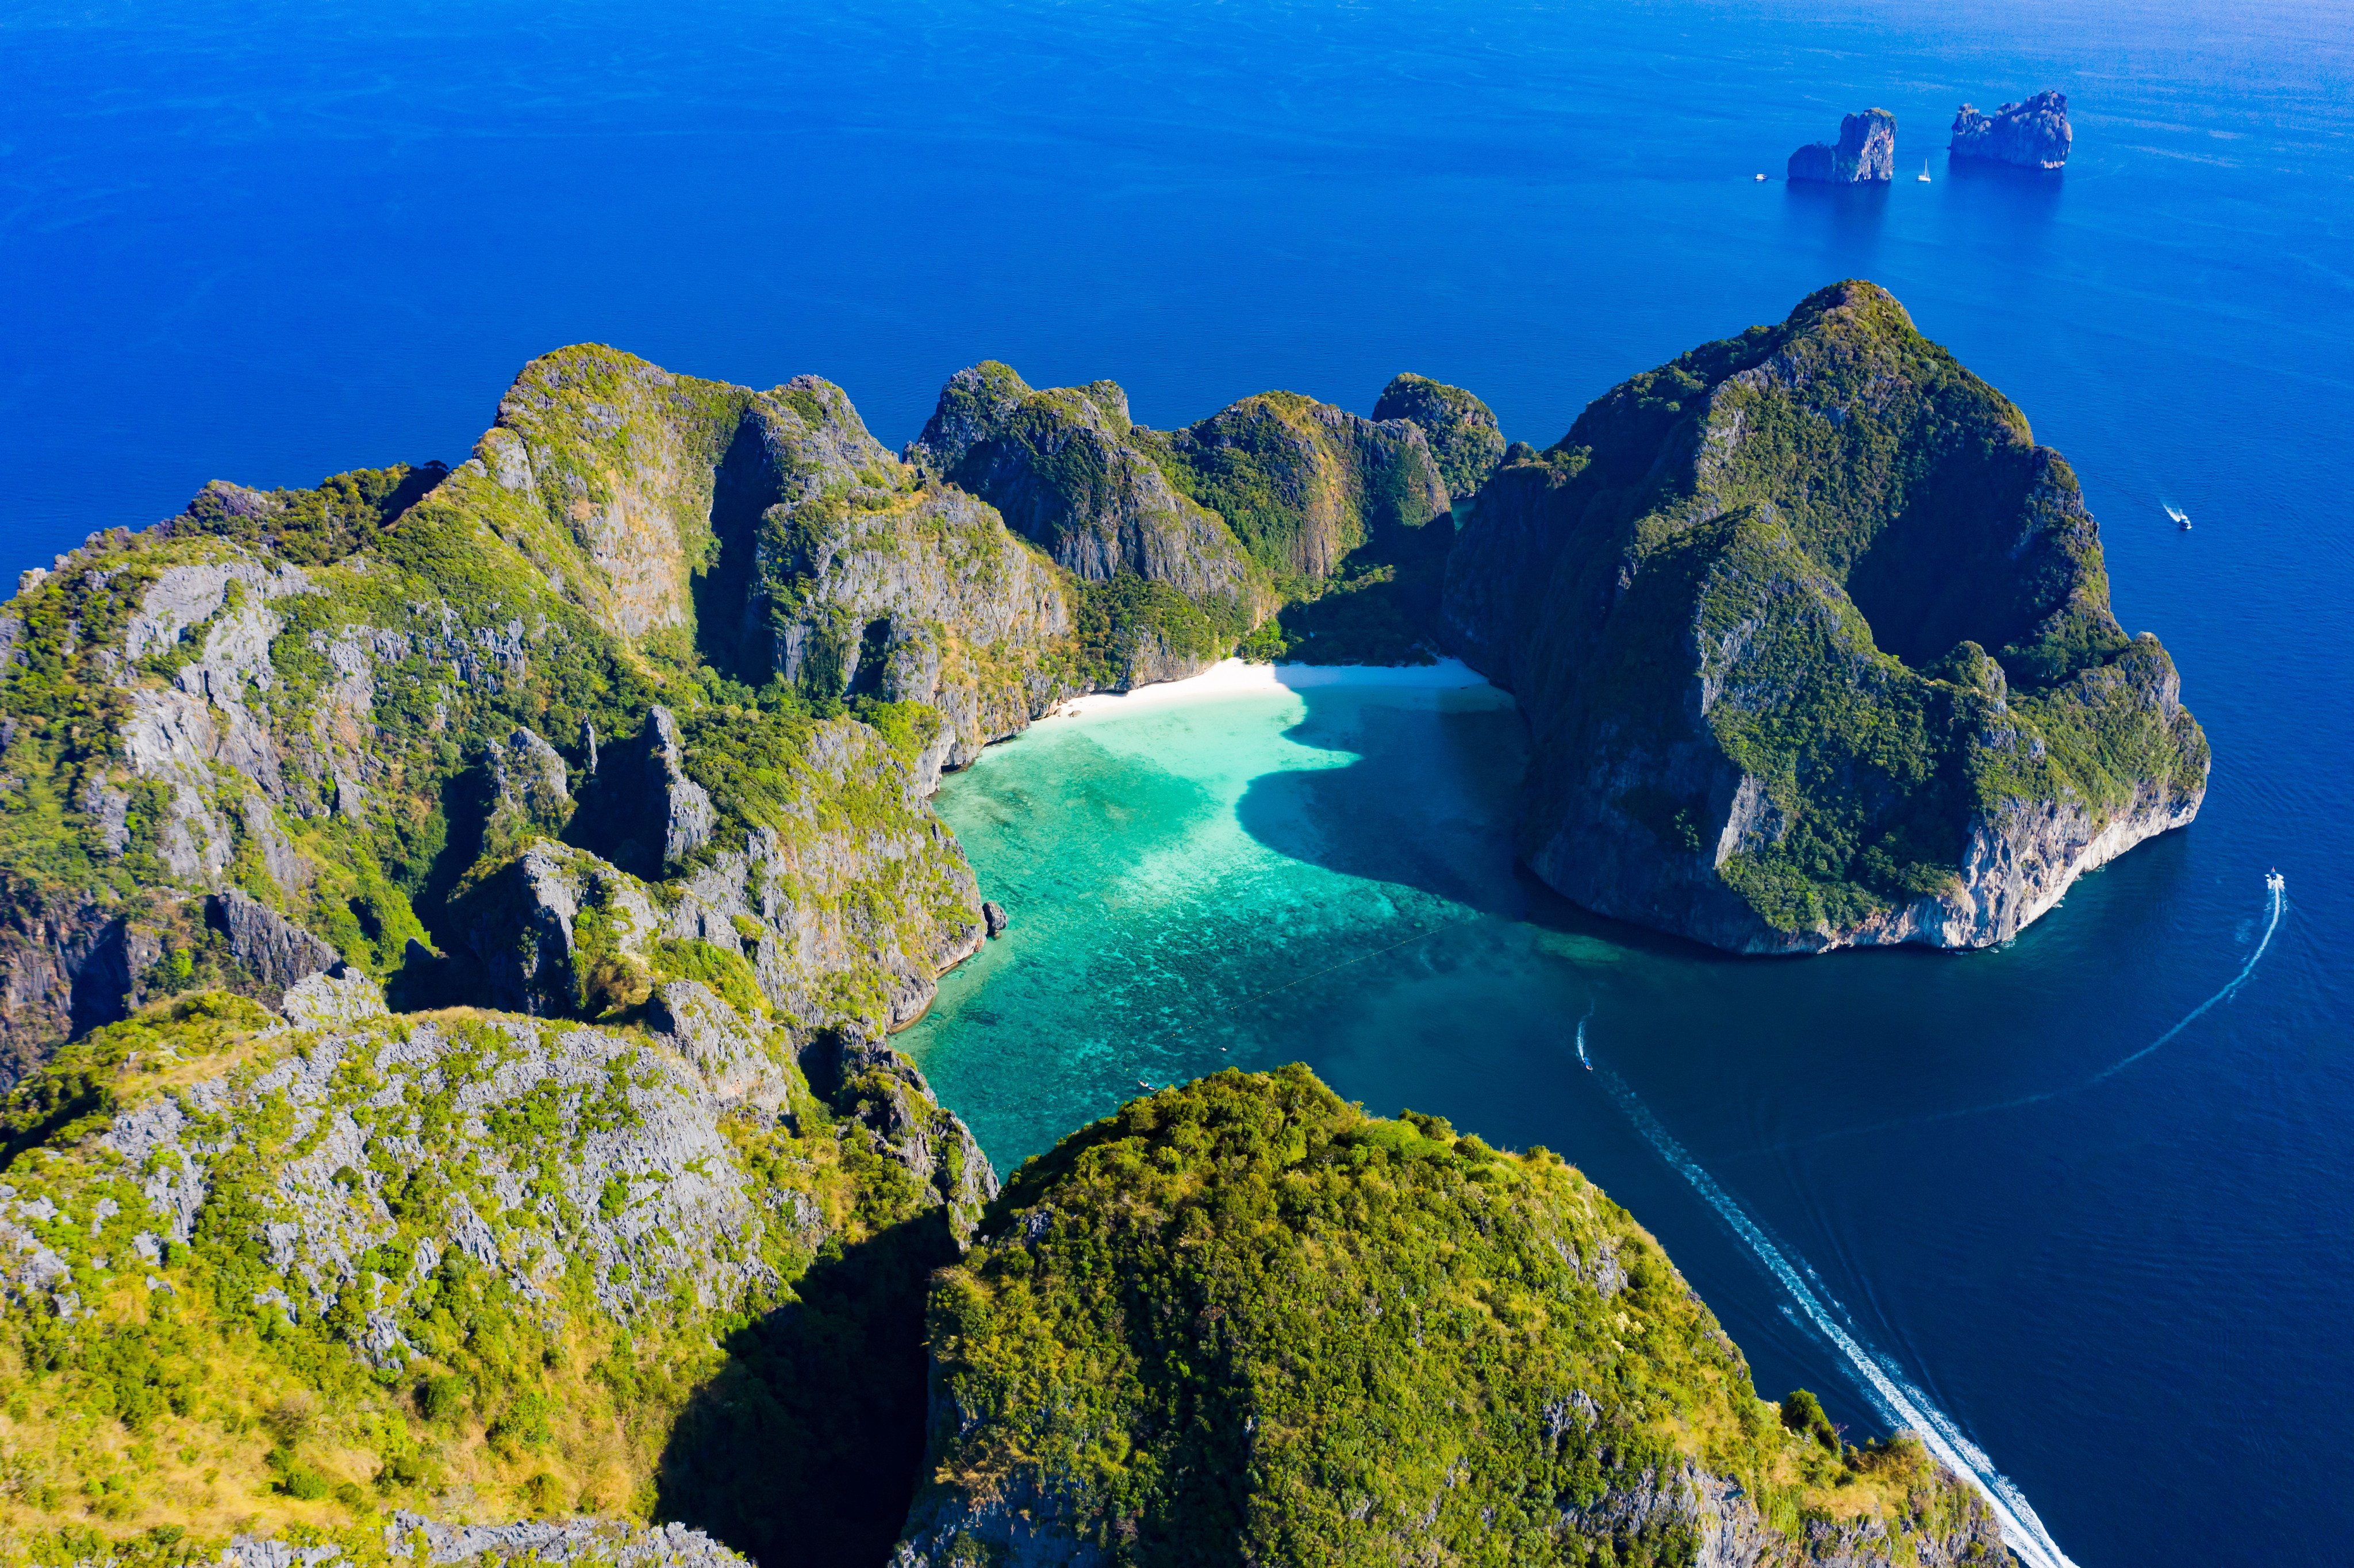 A stunning aerial view of Koh Phi Phi Lee with the beautiful beach of Maya Bay bathed by a turquoise clear water. Amazing limestone karst formations surround this island in Thailand. Photo: Shutterstock